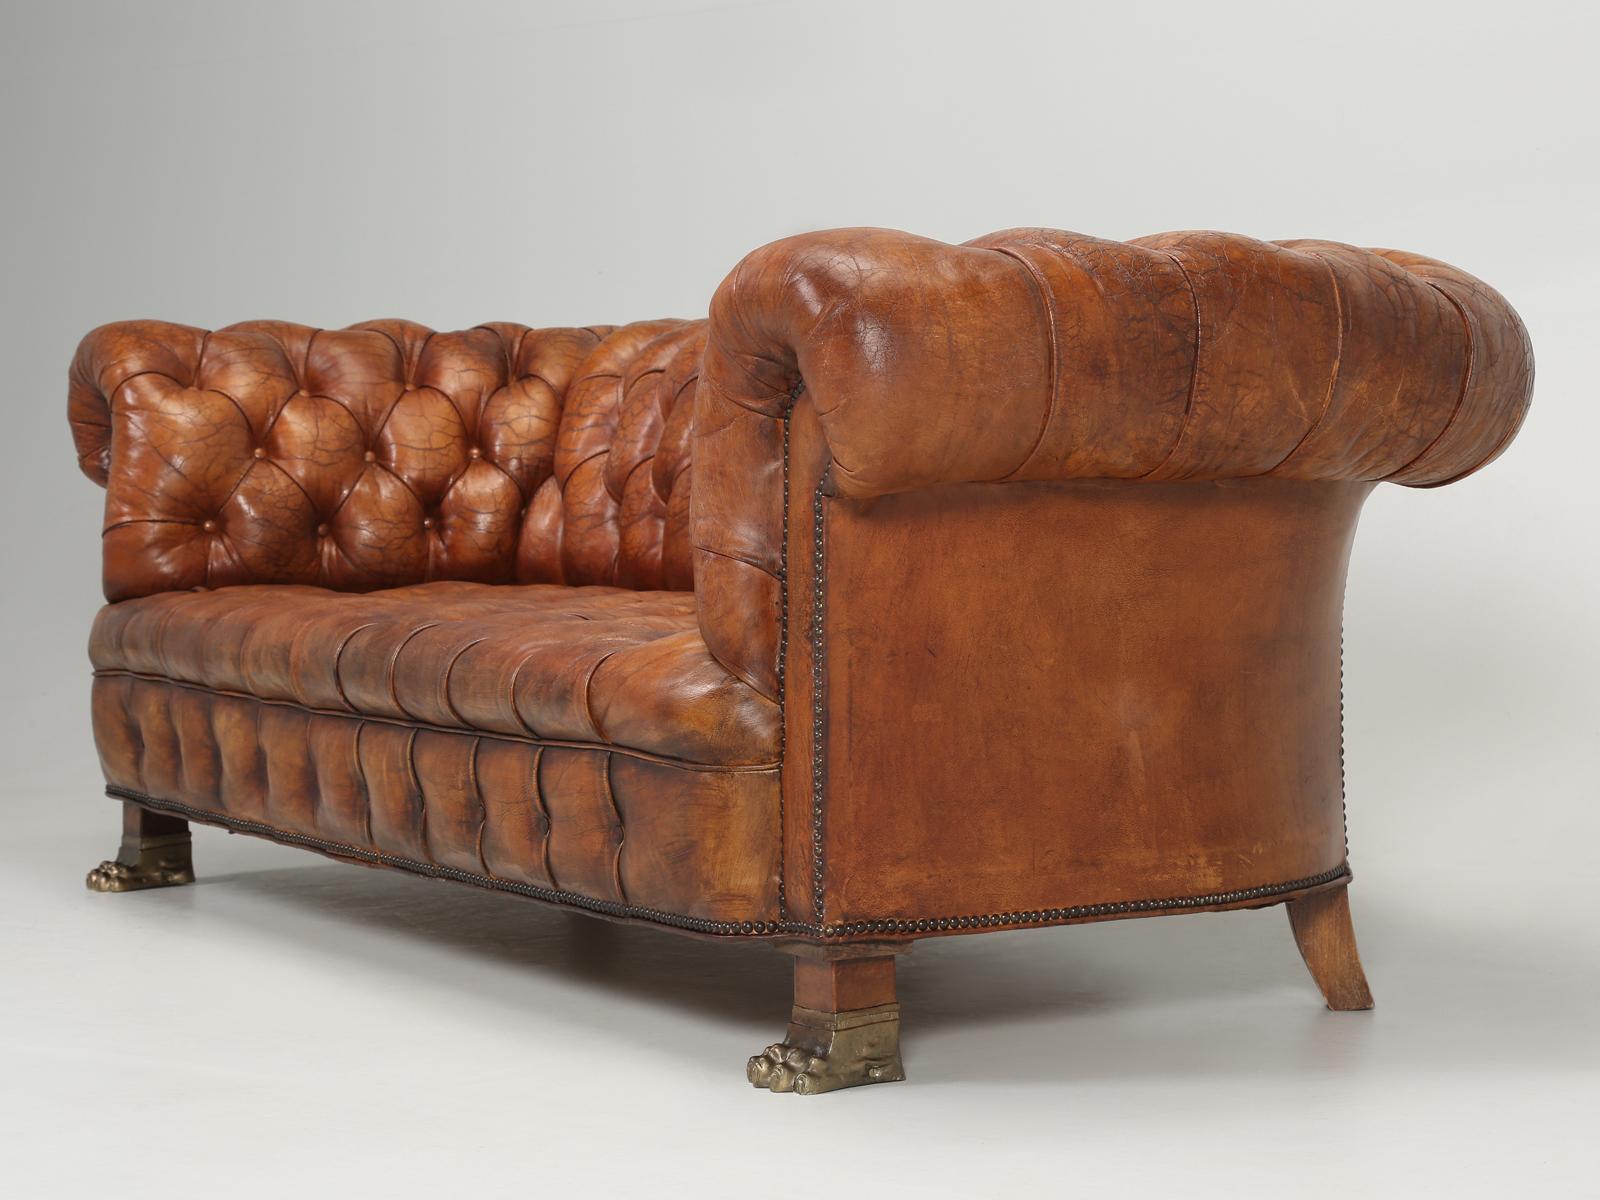 We seem to have caught an extremely rare case of Chesterfielditis, somehow or another we have collected a menagerie of old original leather Chesterfield sofas and chairs from the late 1800’s to the early 1900’s. Honestly, is there really anything